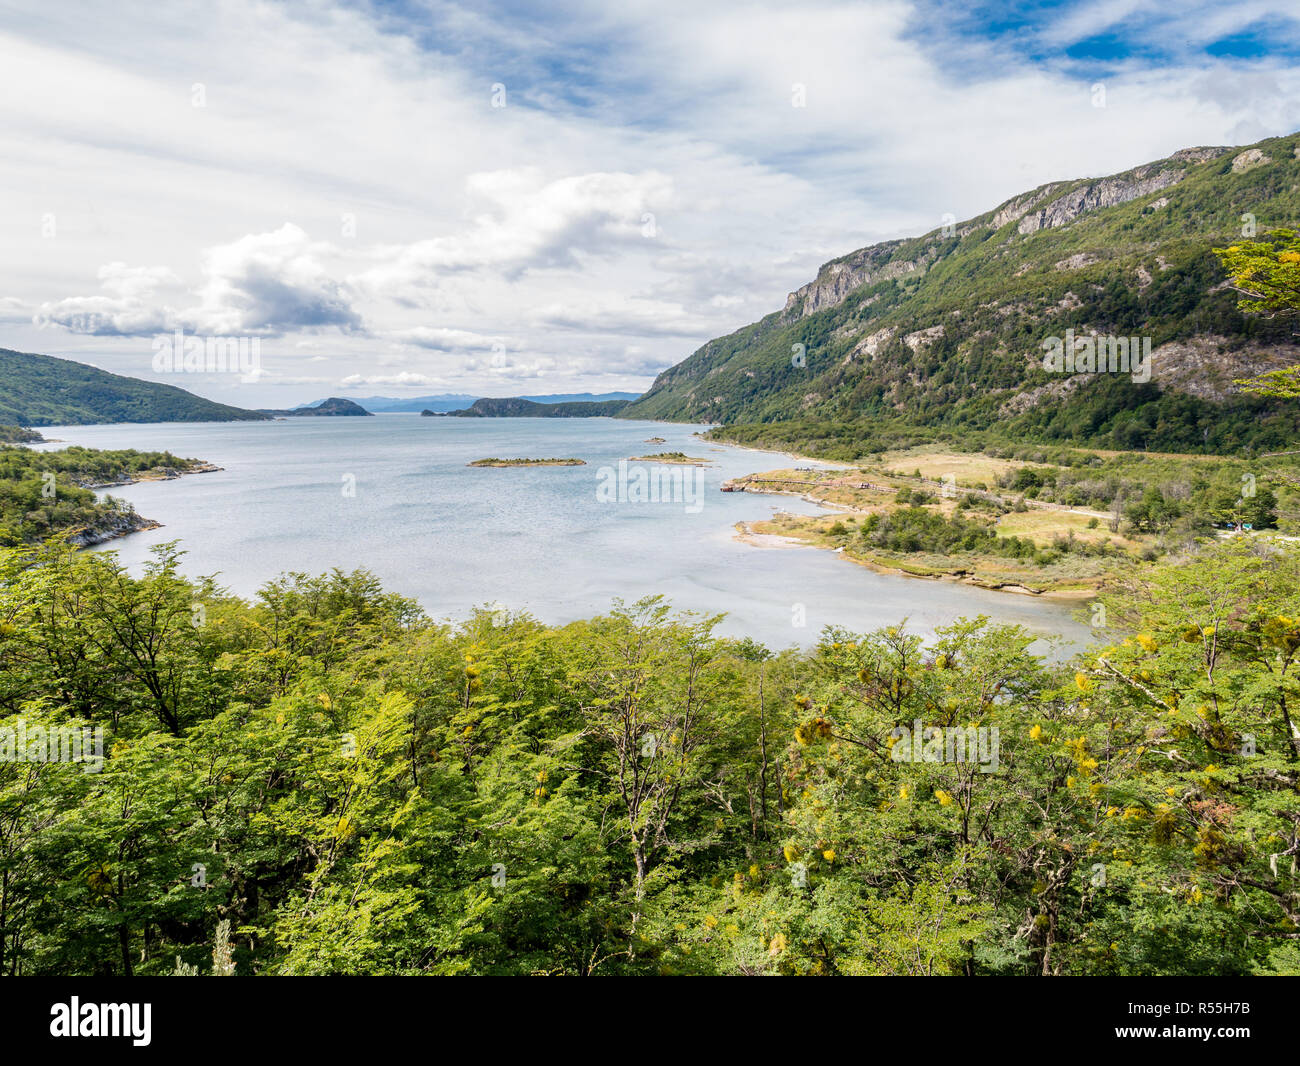 Panorama of Lapataia Bay and Beagle Channel in Tierra del Fuego National Park, Patagonia, Argentina Stock Photo